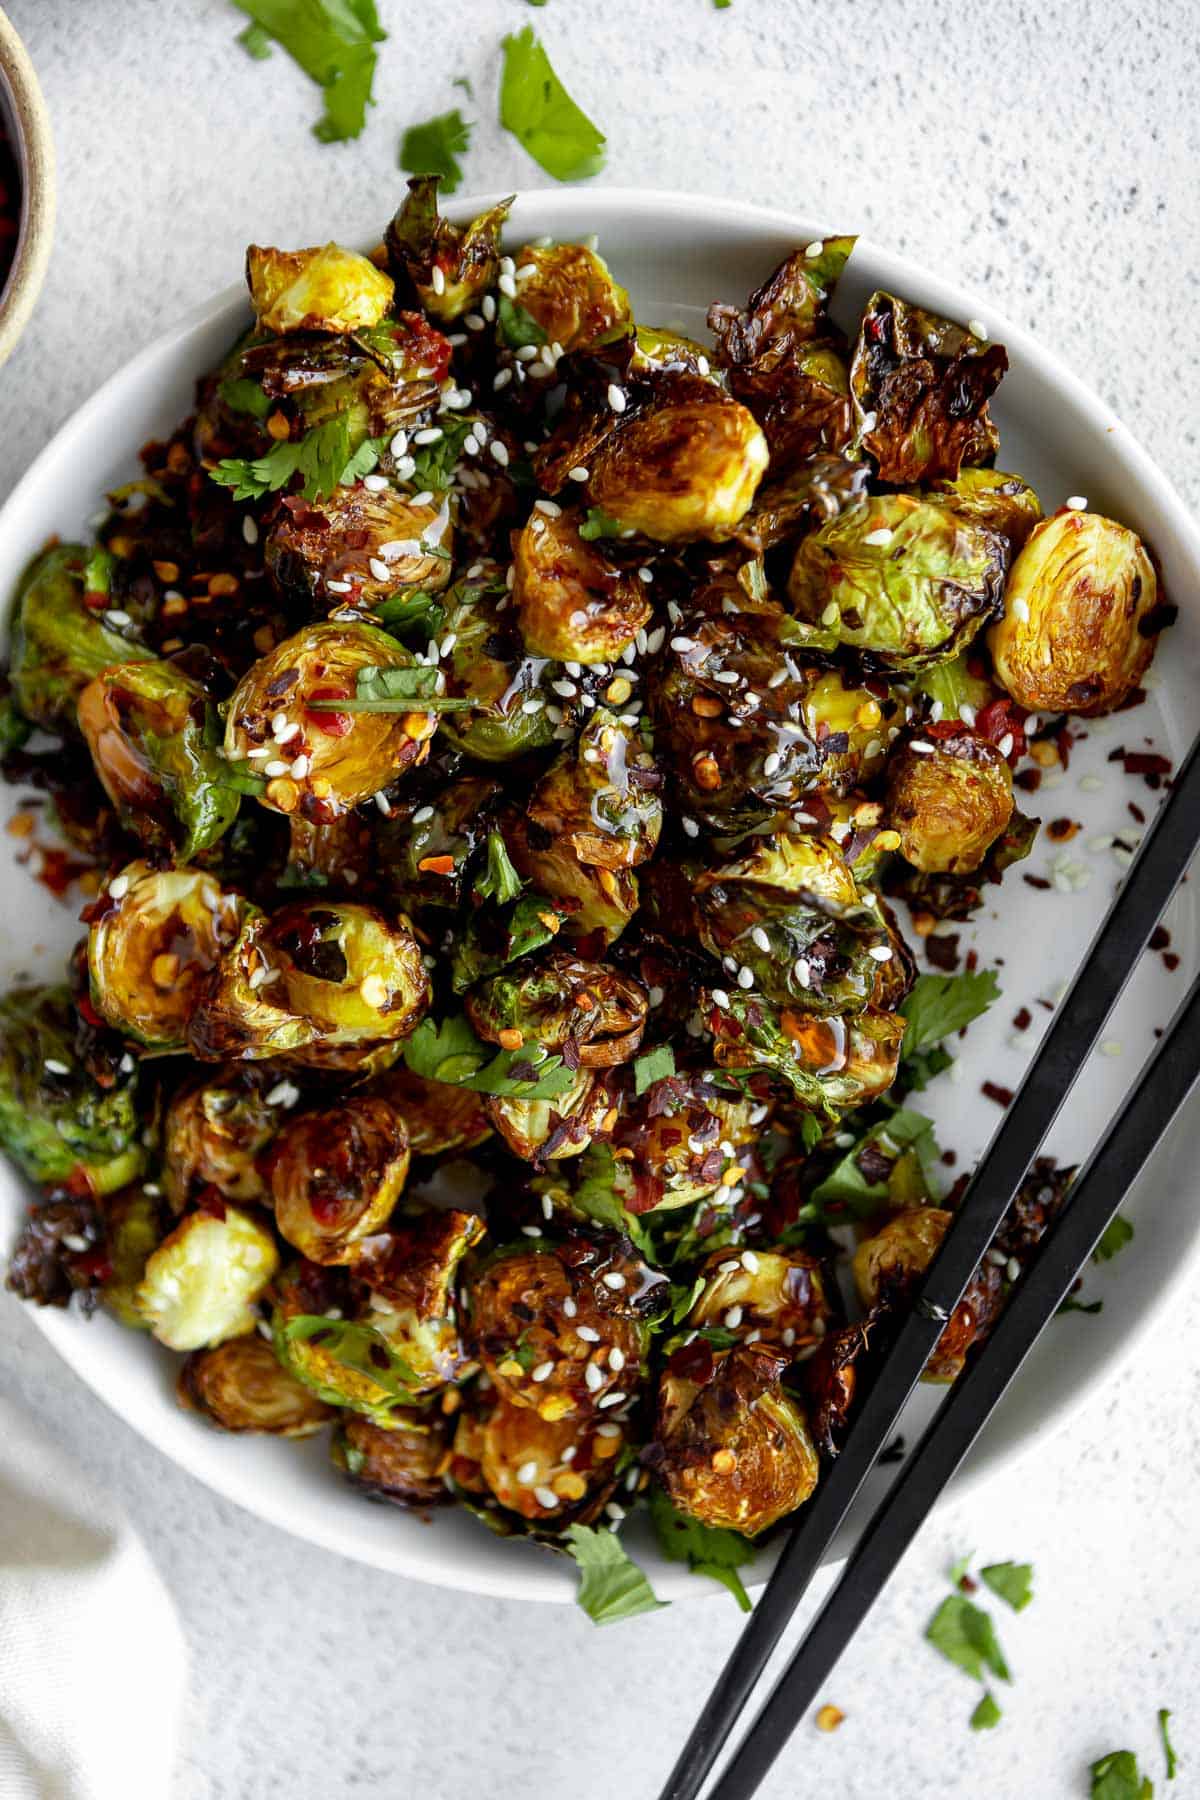 Chili Garlic Air Fryer Brussels Sprouts